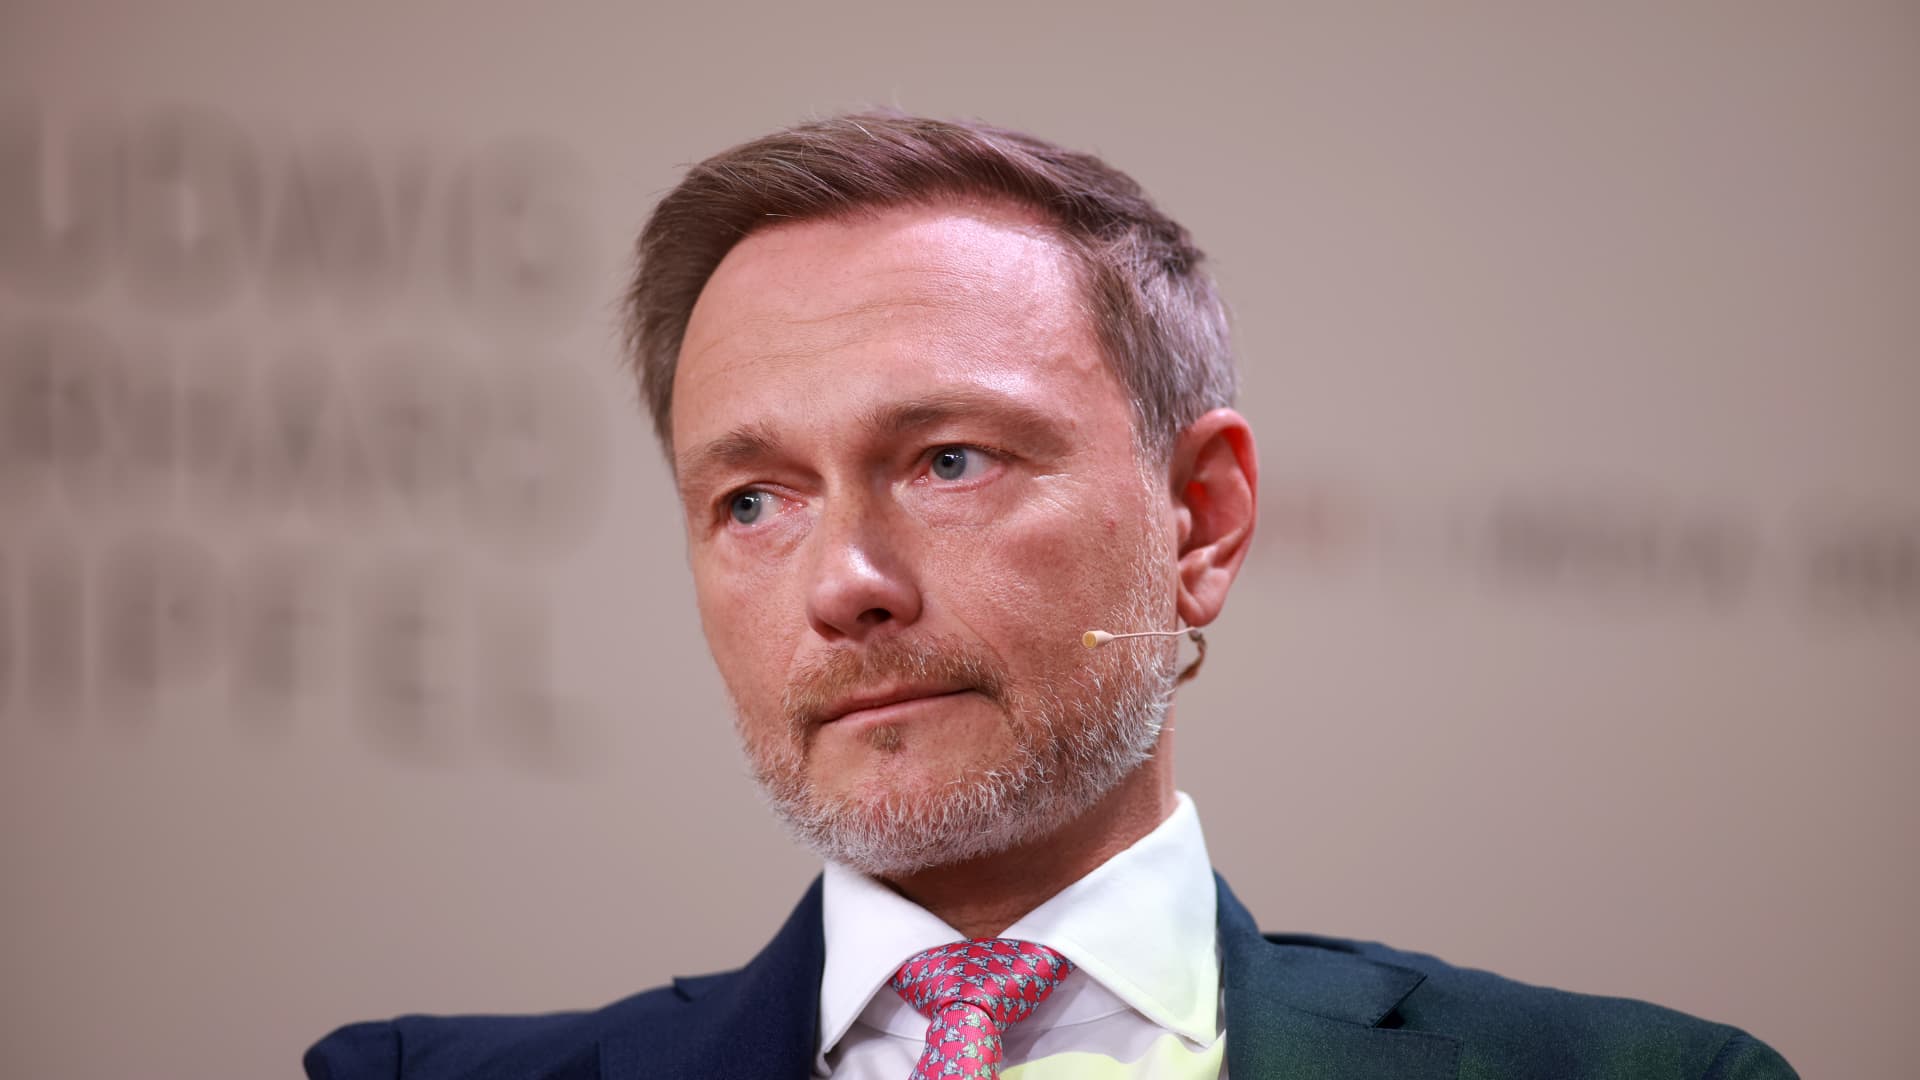 Photo of German minister calls for maturity on U.S. debt ceiling talks: ‘We have to avoid further risks’